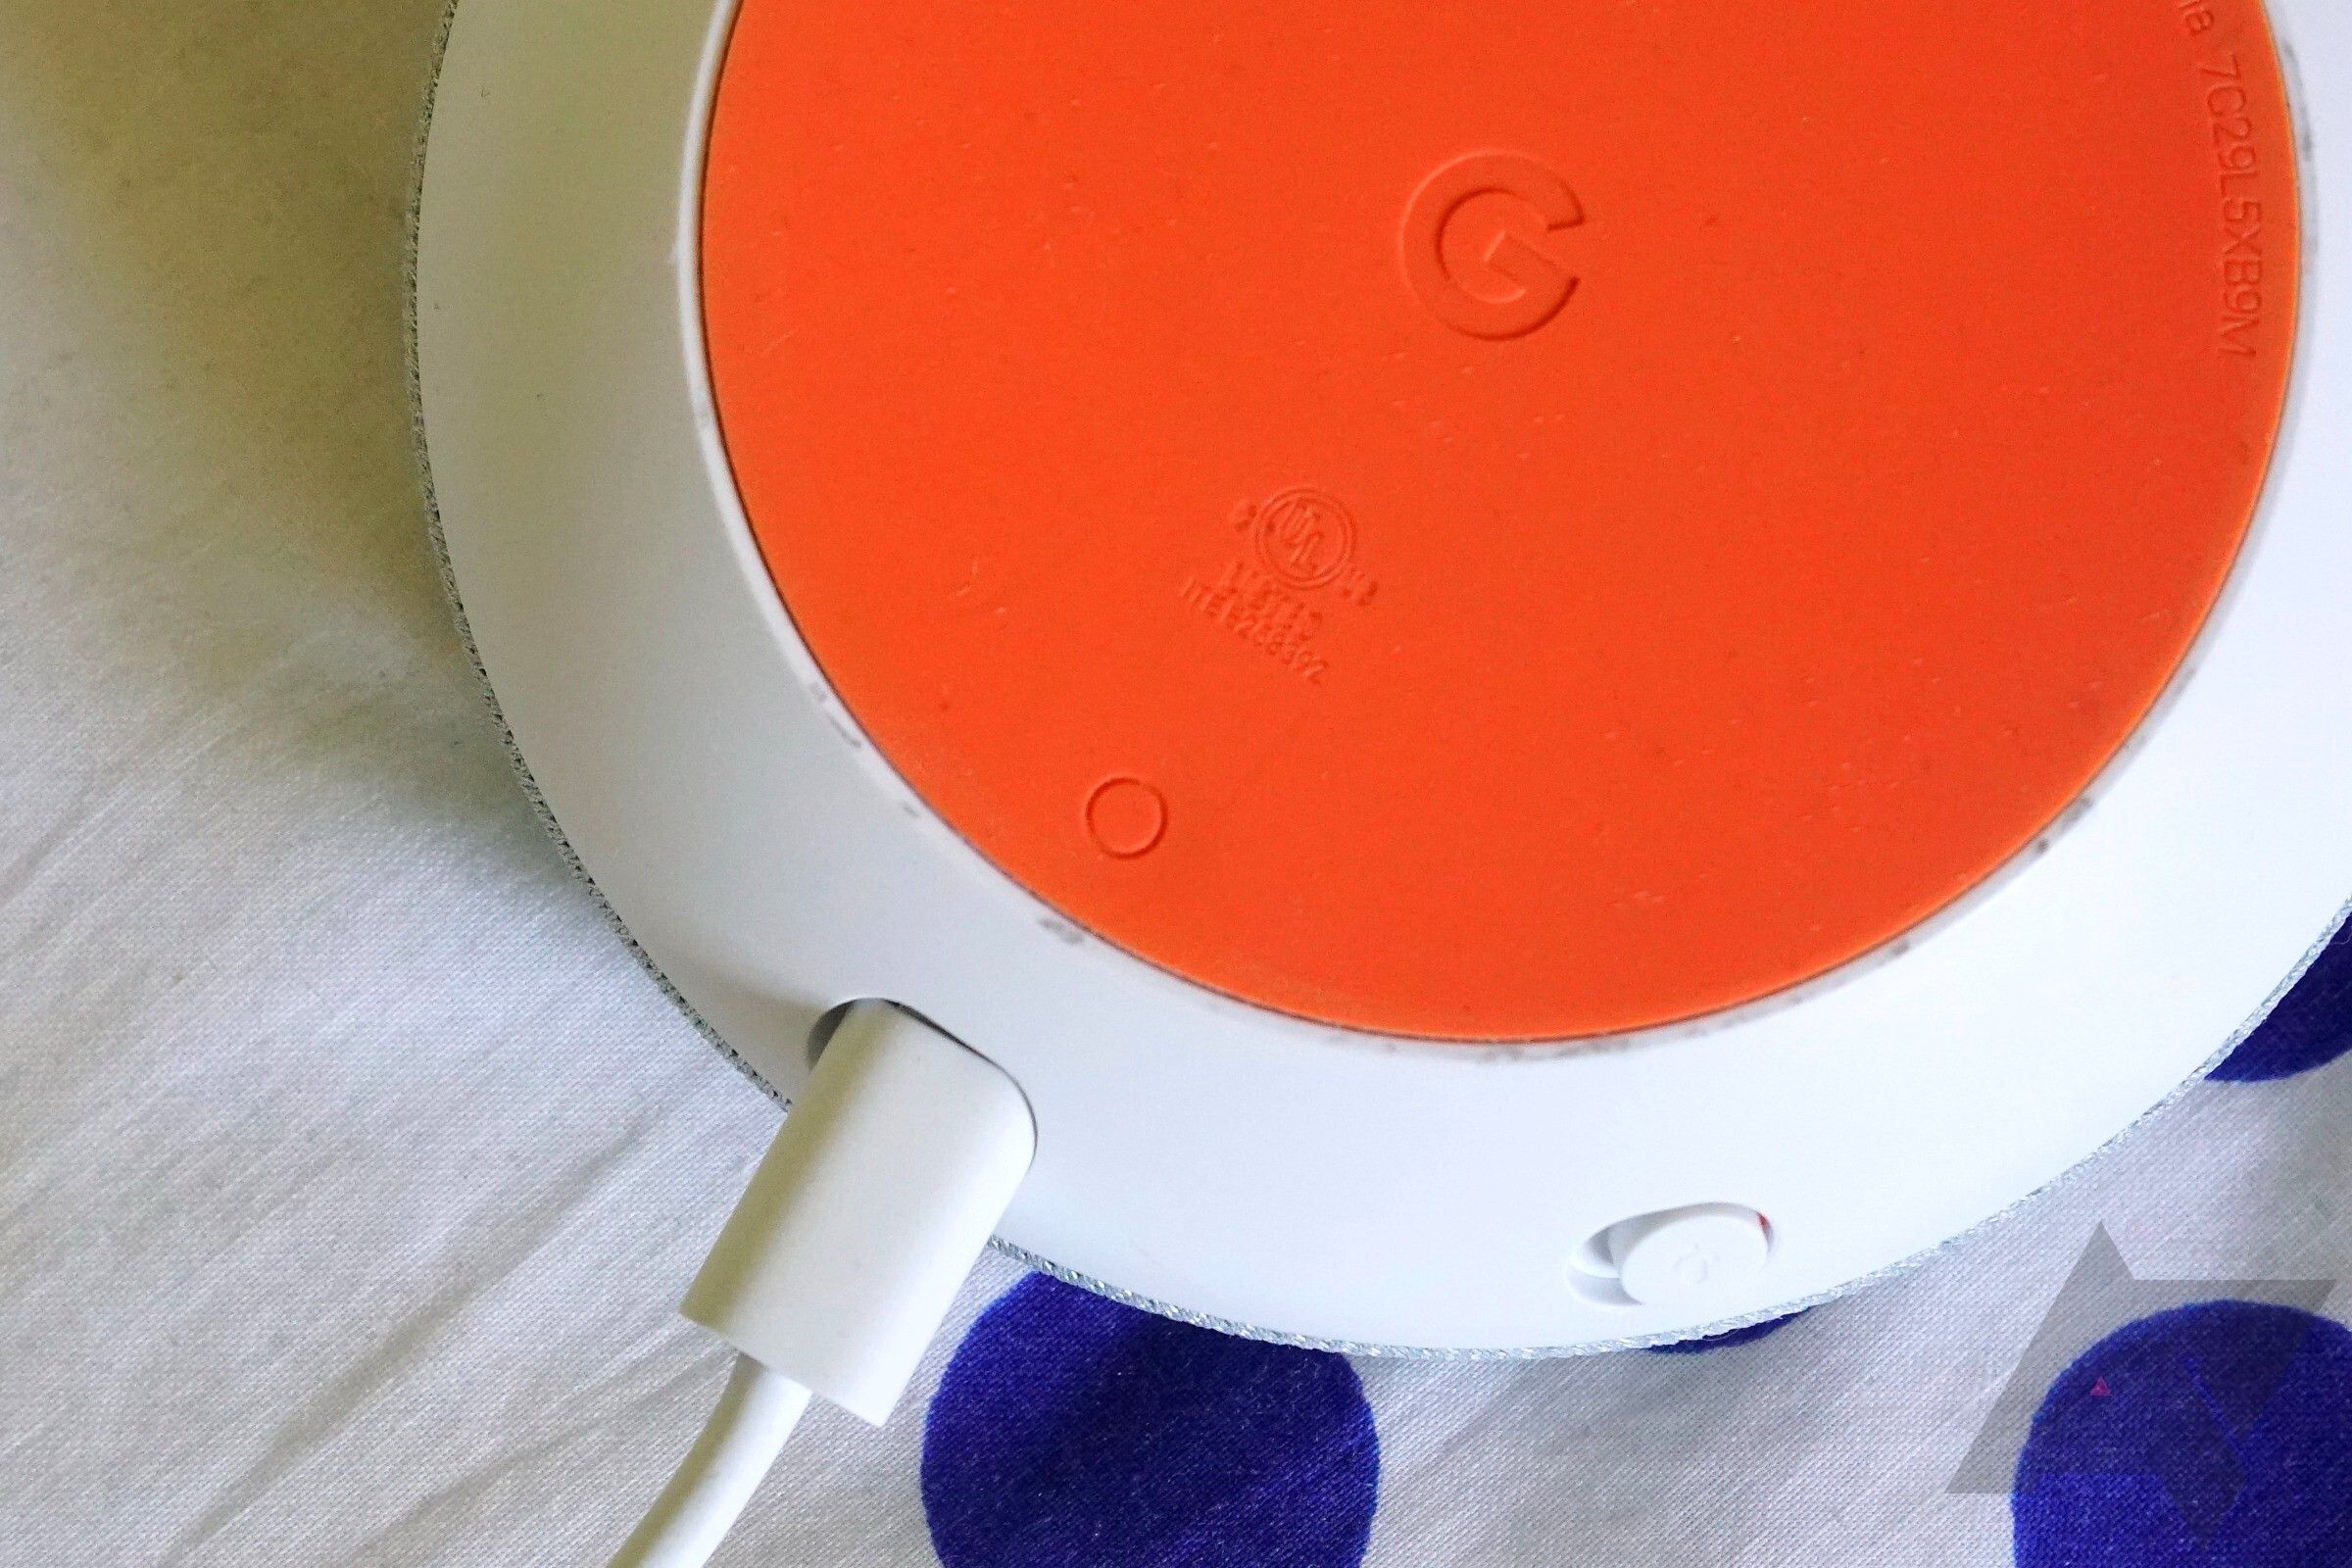 The bottom of a Google Home Mini speaker showing its power cord and reset button